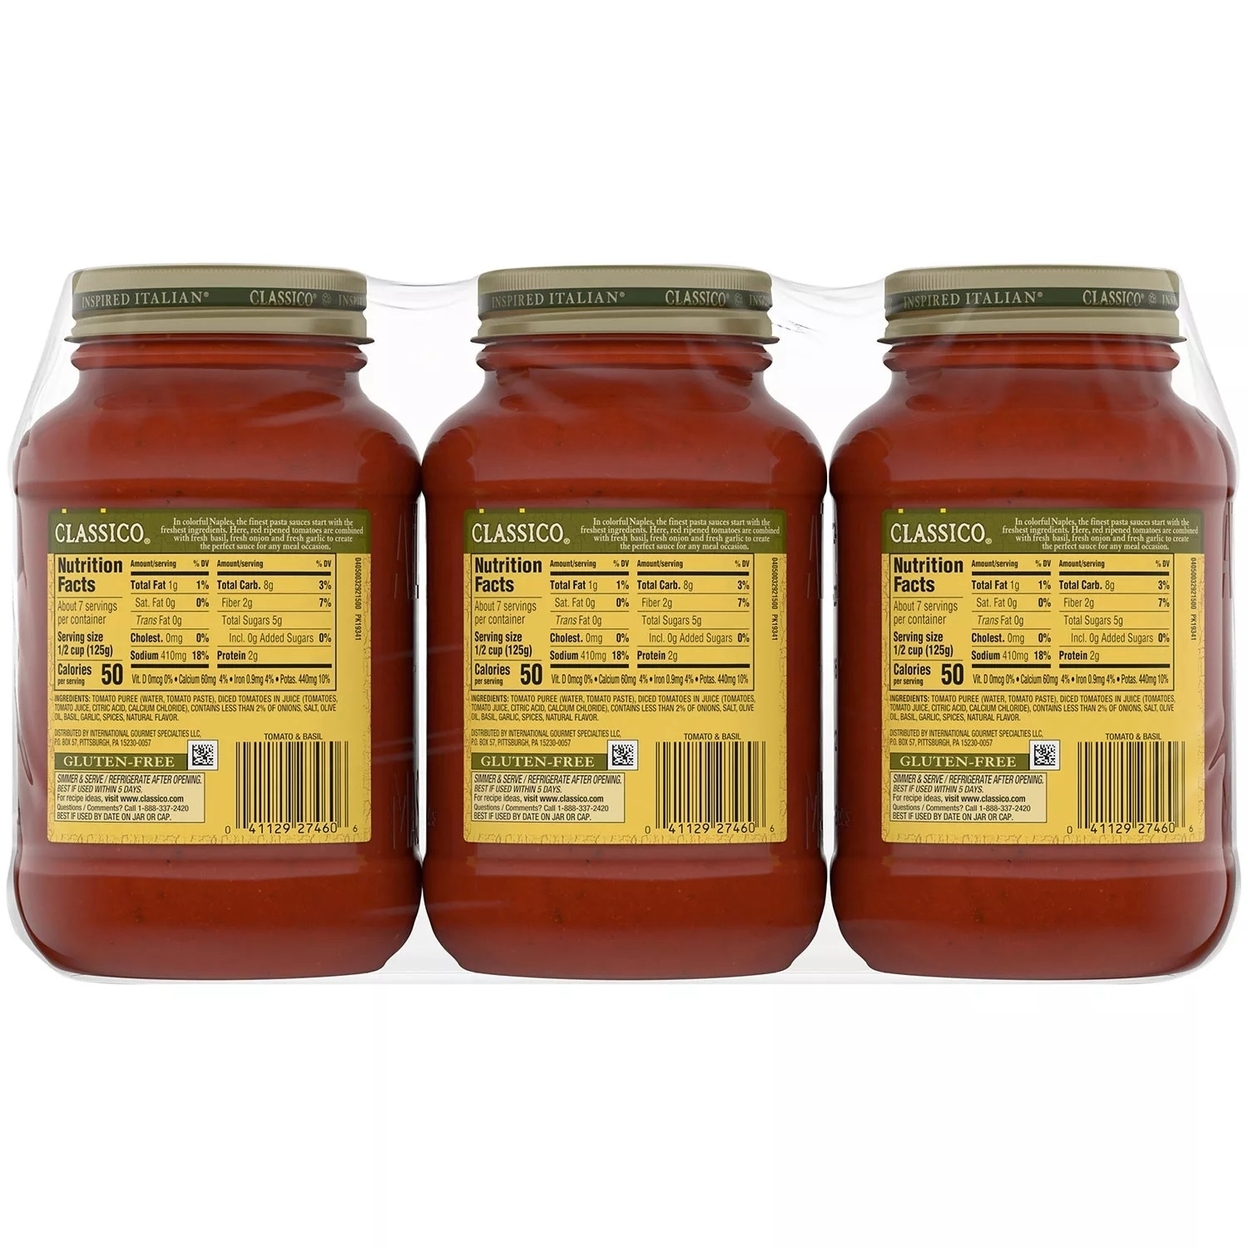 Classico Tomato And Basil Pasta Sauce, 32 Ounce (Pack Of 3)